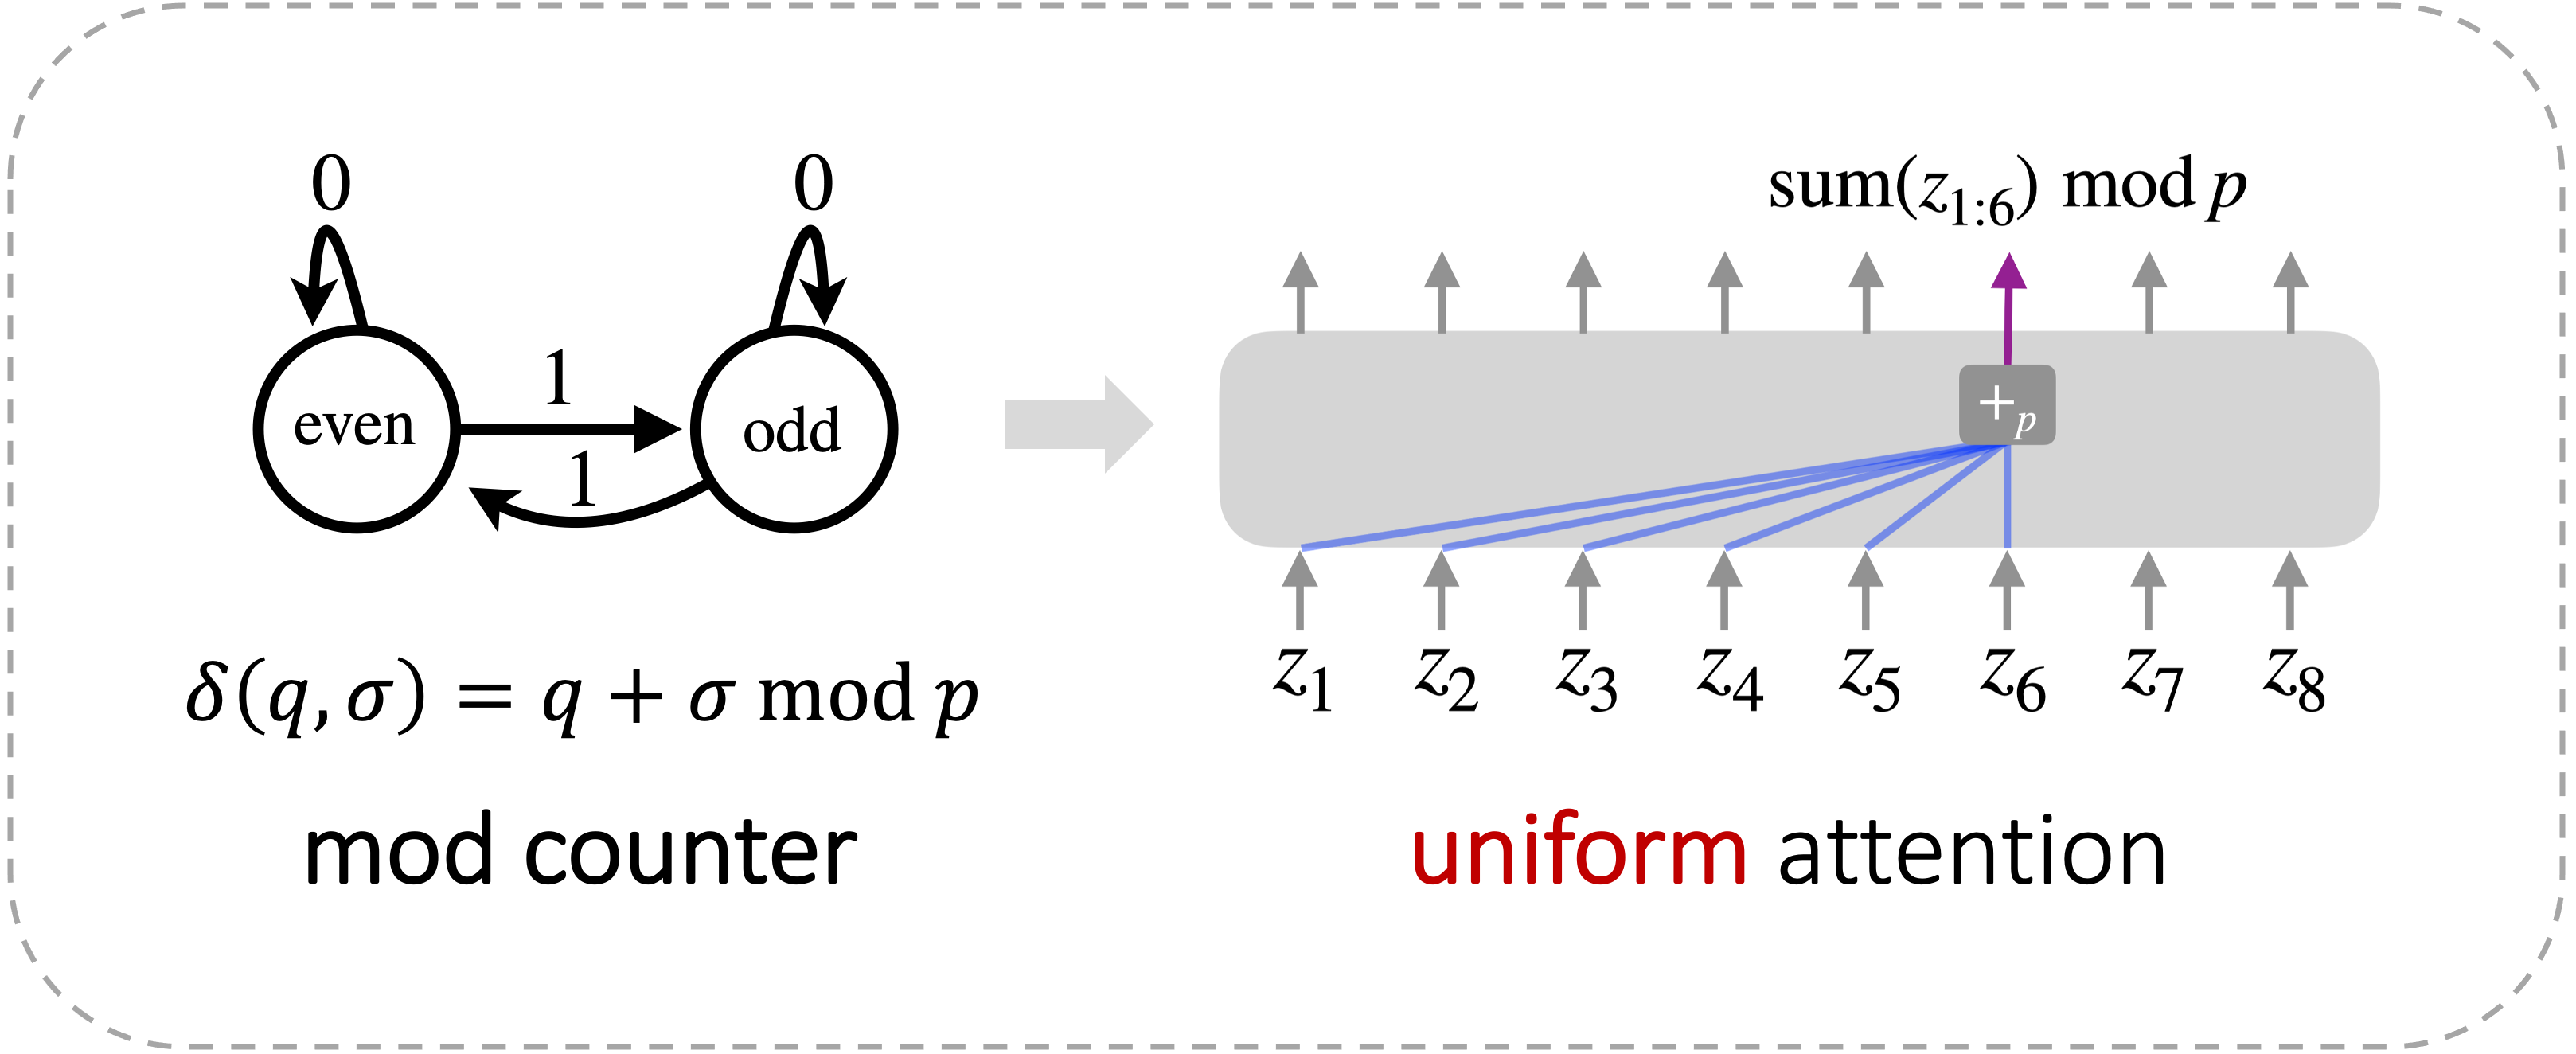 Mod counter and uniform attention